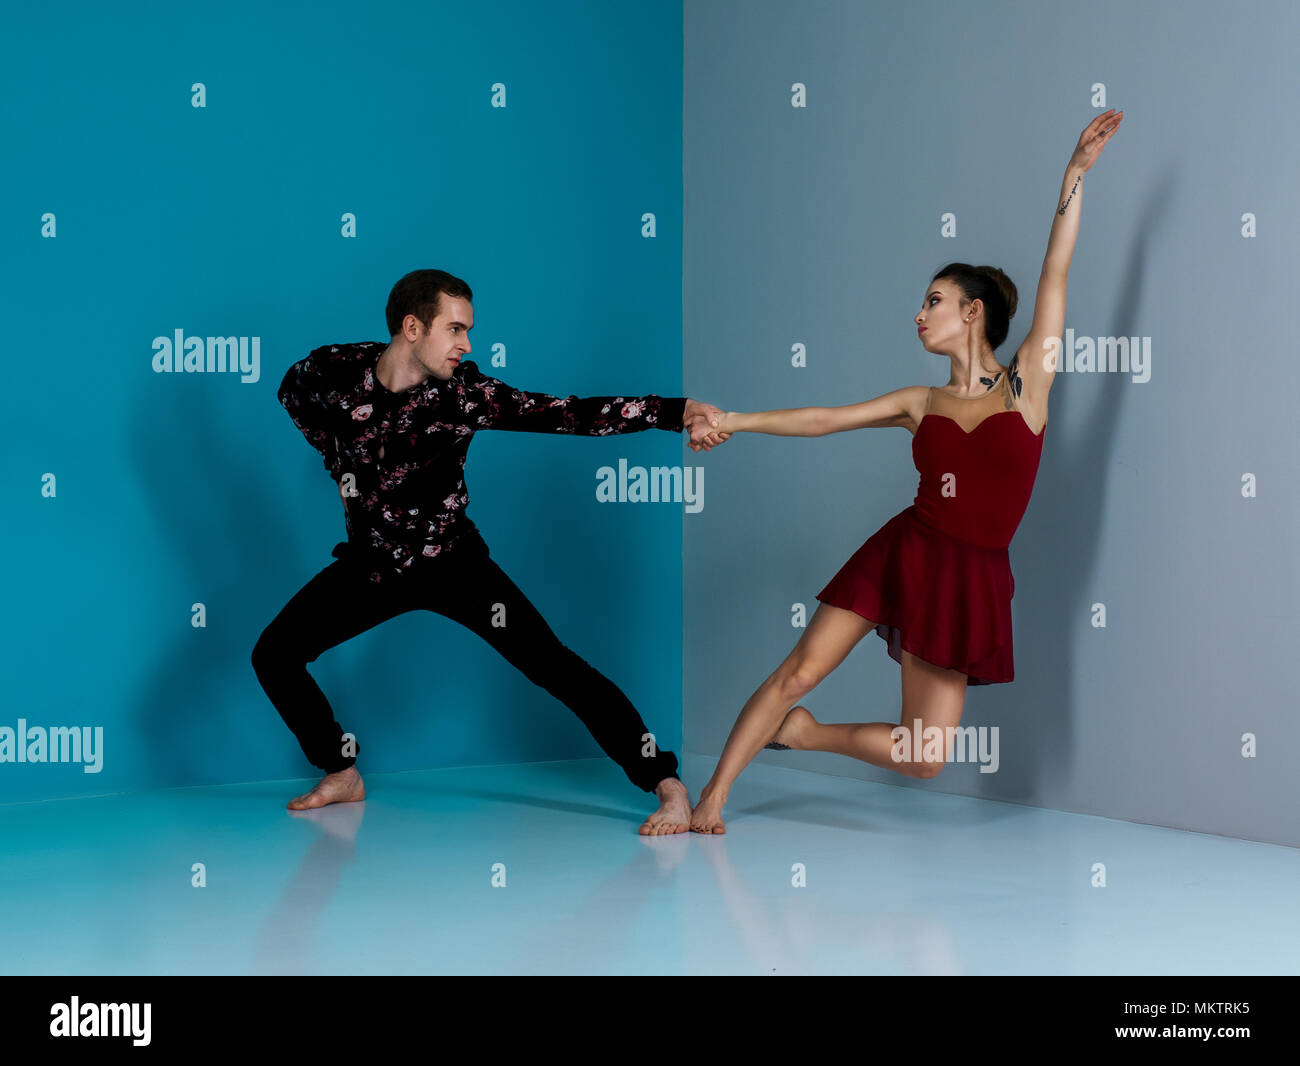 Modern ballet dancer couple in black trousers black in roses shirt and bordo dress performing art dance element with space background Stock Photo